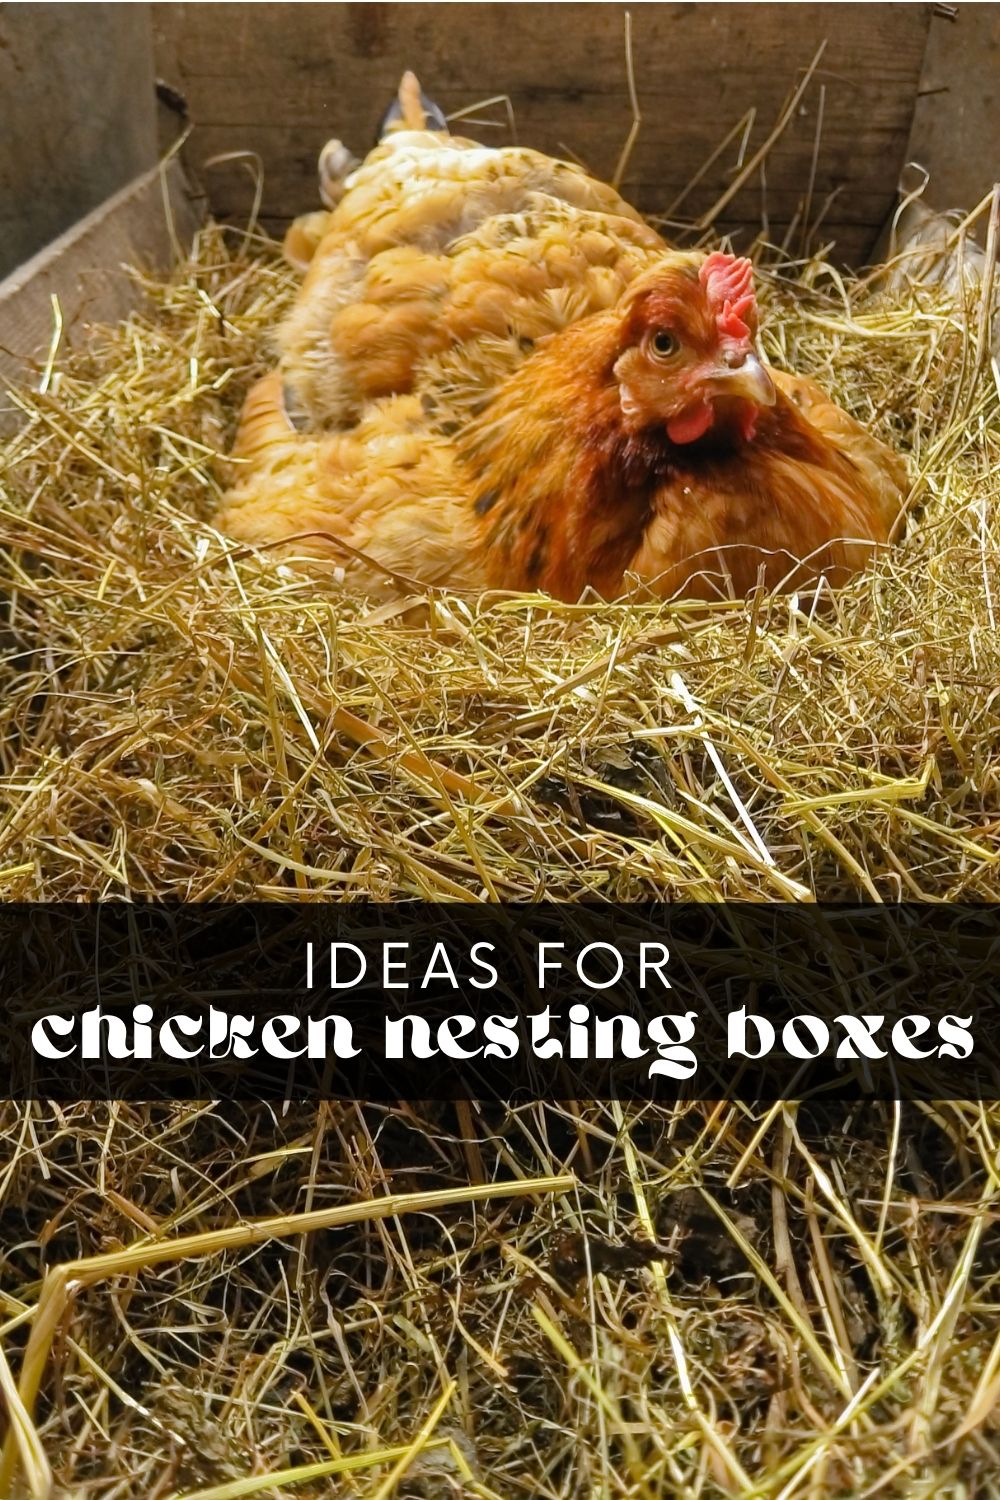 Getting your chicken coop ready for your flock doesn't have to be expensive! These nesting boxes for chickens are cheap, easy to make, and do the job perfectly. Follow my step-by-step guide to create a cozy home for your hens!